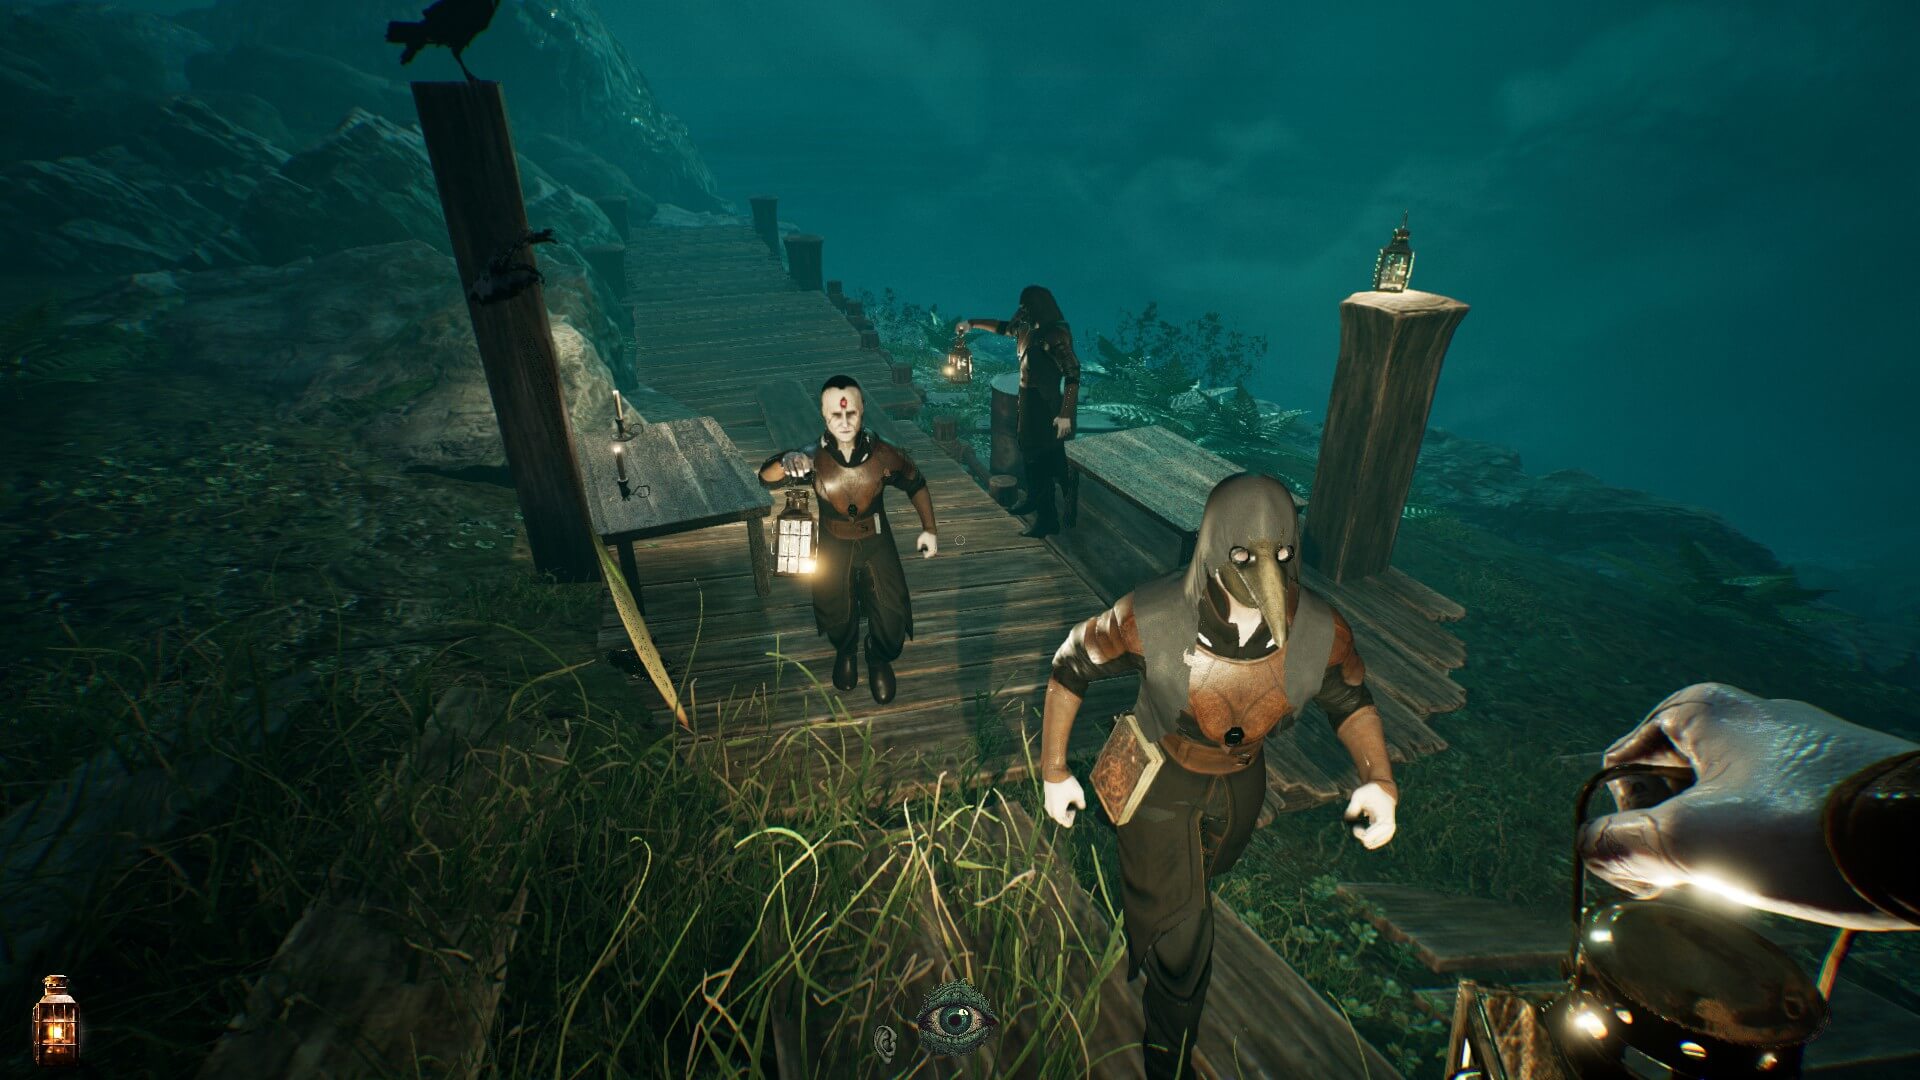 Three characters all looking sinister walk towards the camera on a wooden boardwalk